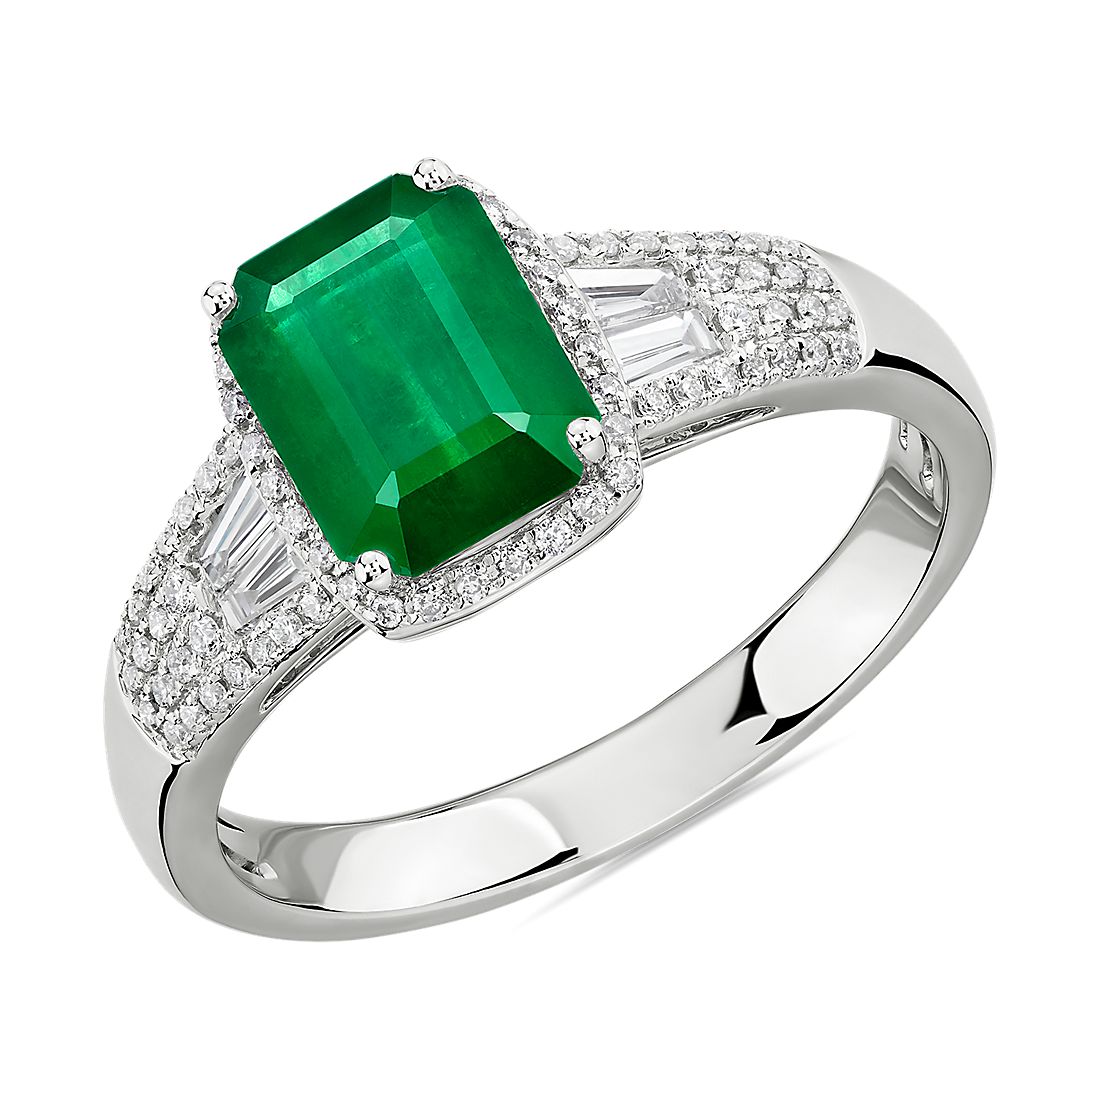 Emerald Ring with Diamond Baguette Accents in 14k White Gold